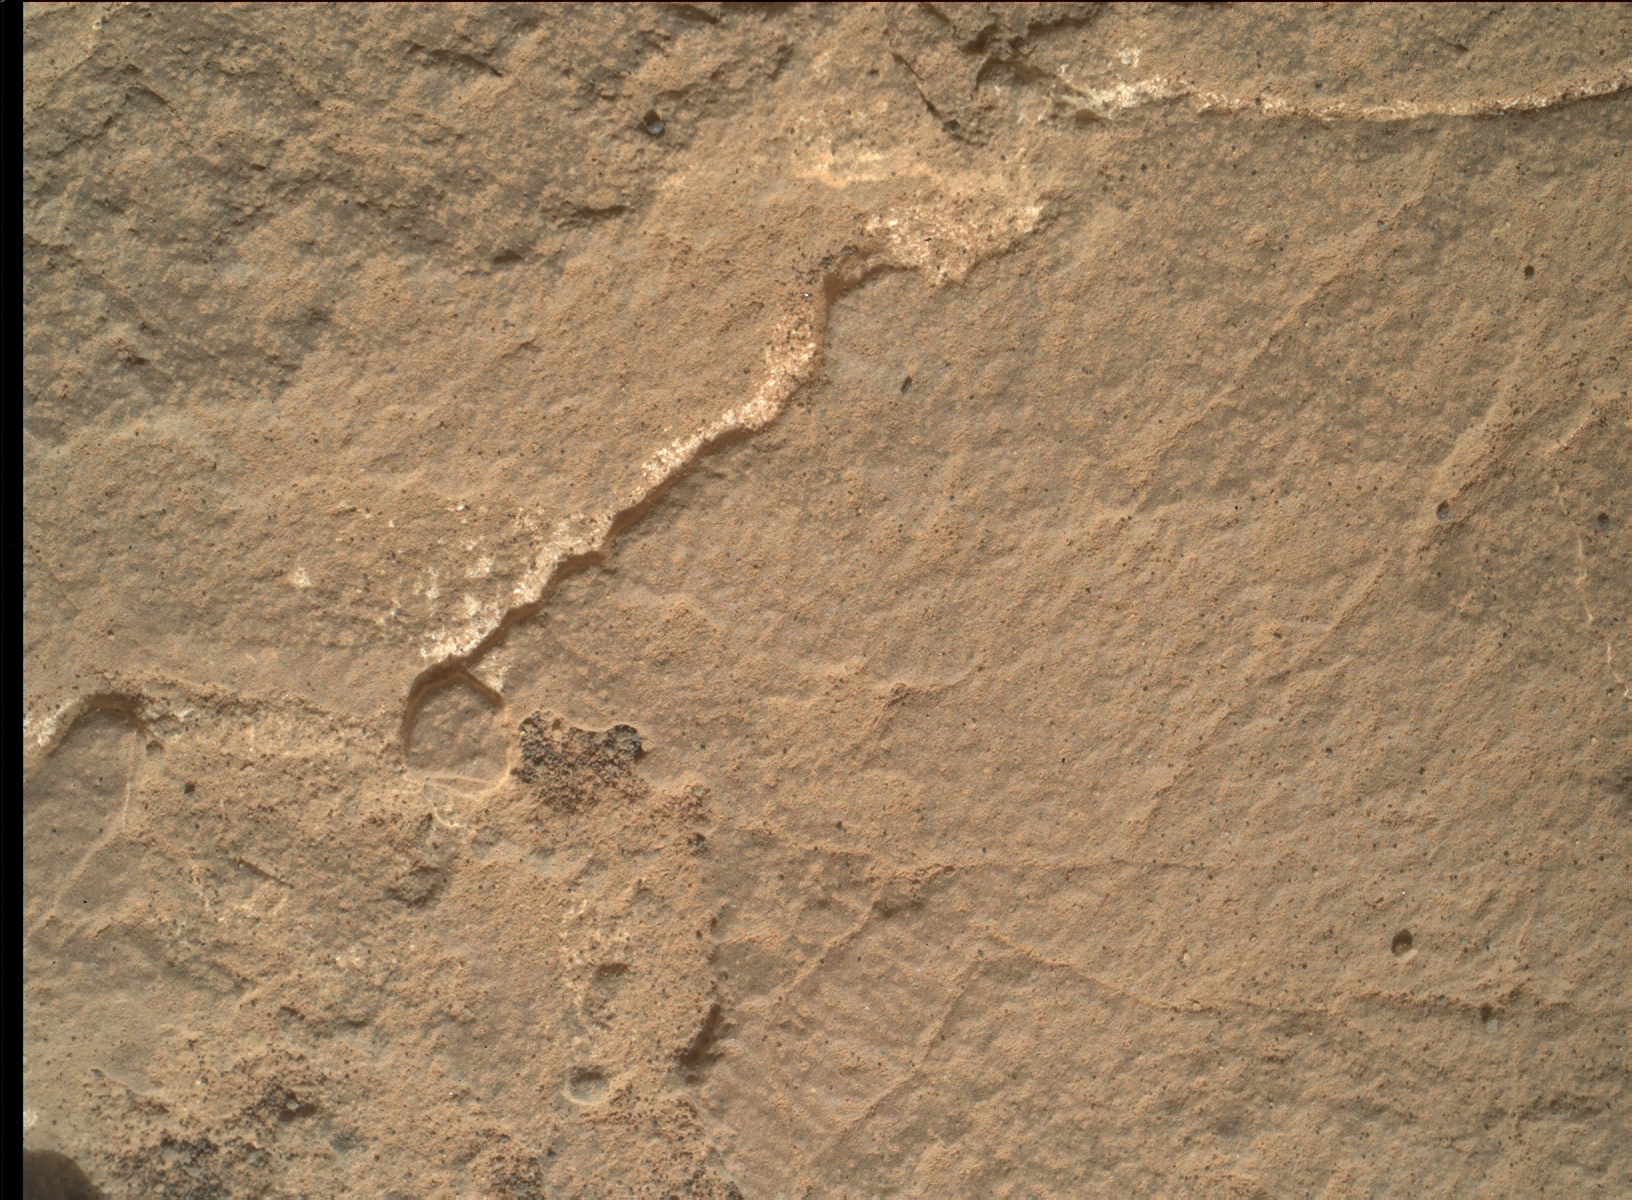 Nasa's Mars rover Curiosity acquired this image using its Mars Hand Lens Imager (MAHLI) on Sol 1692